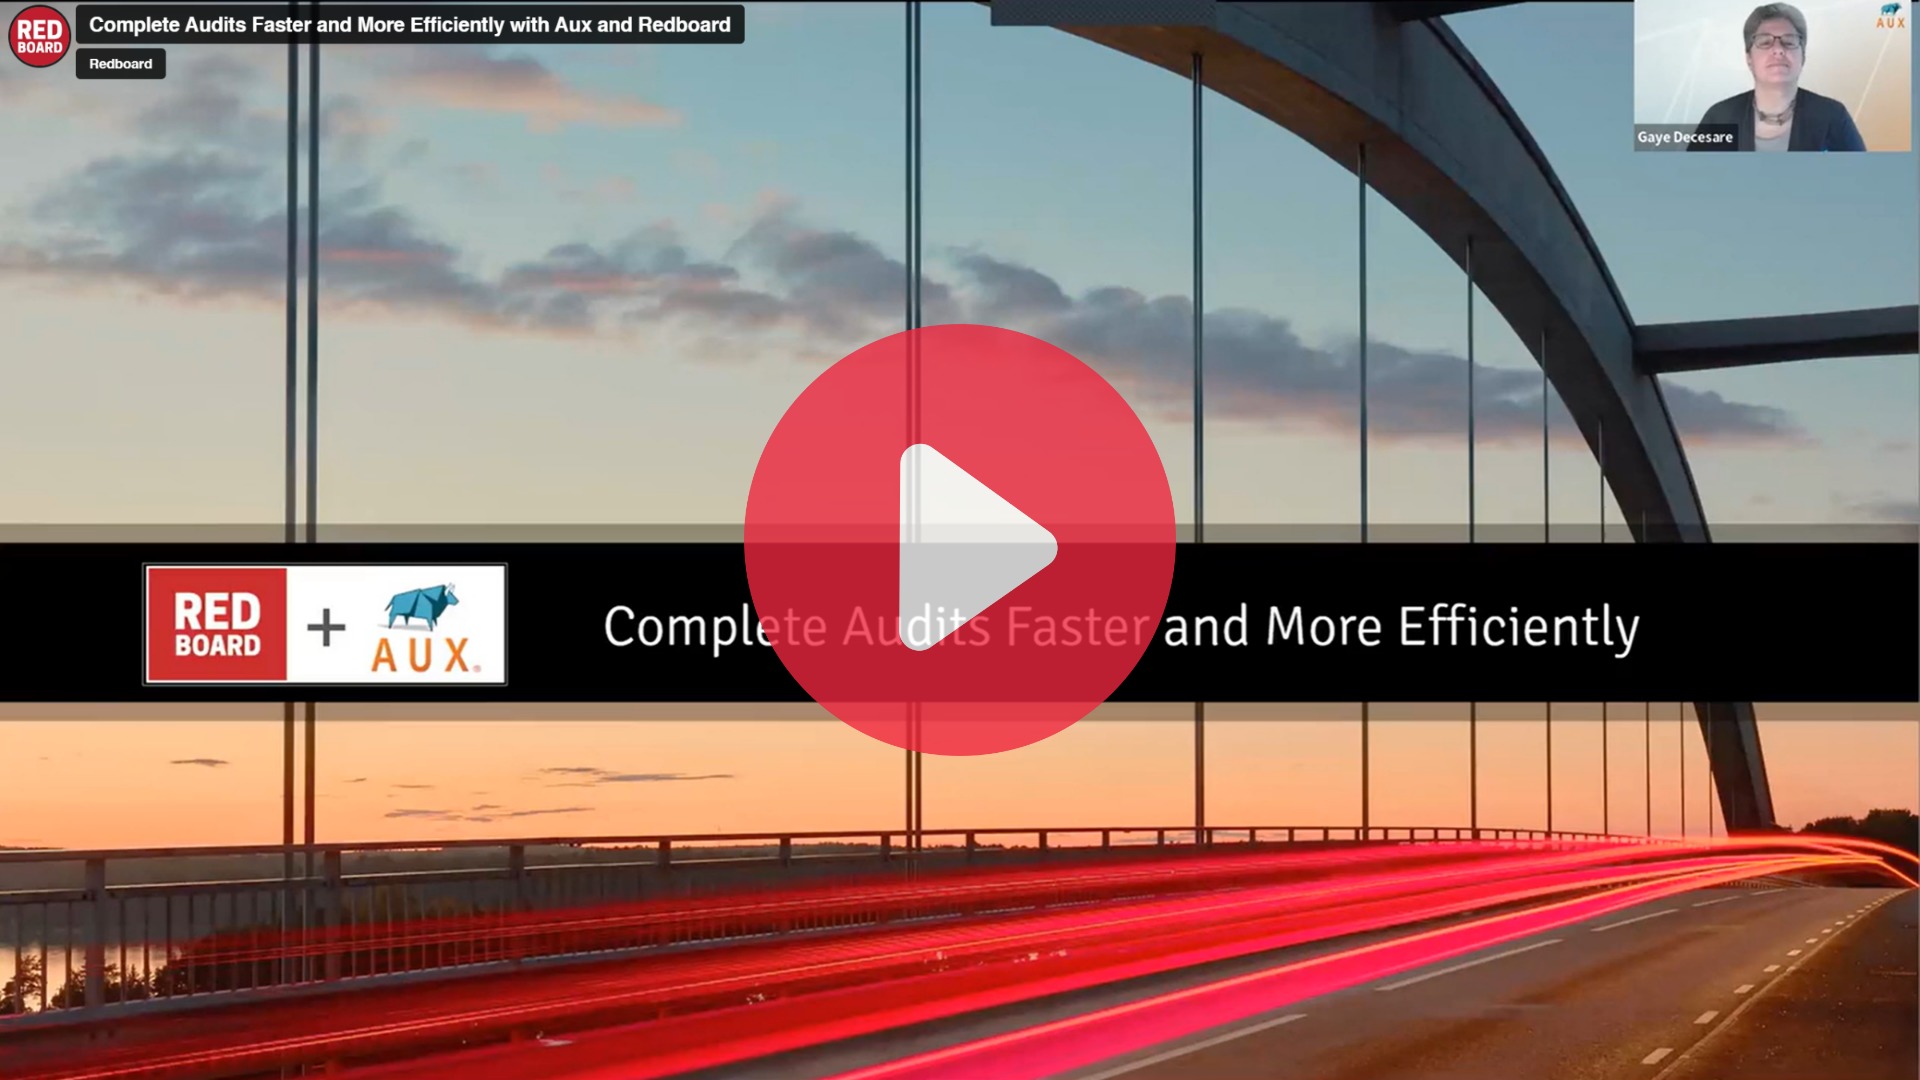 Link to video: Complete-Audits-Faster-and-More-Efficiently